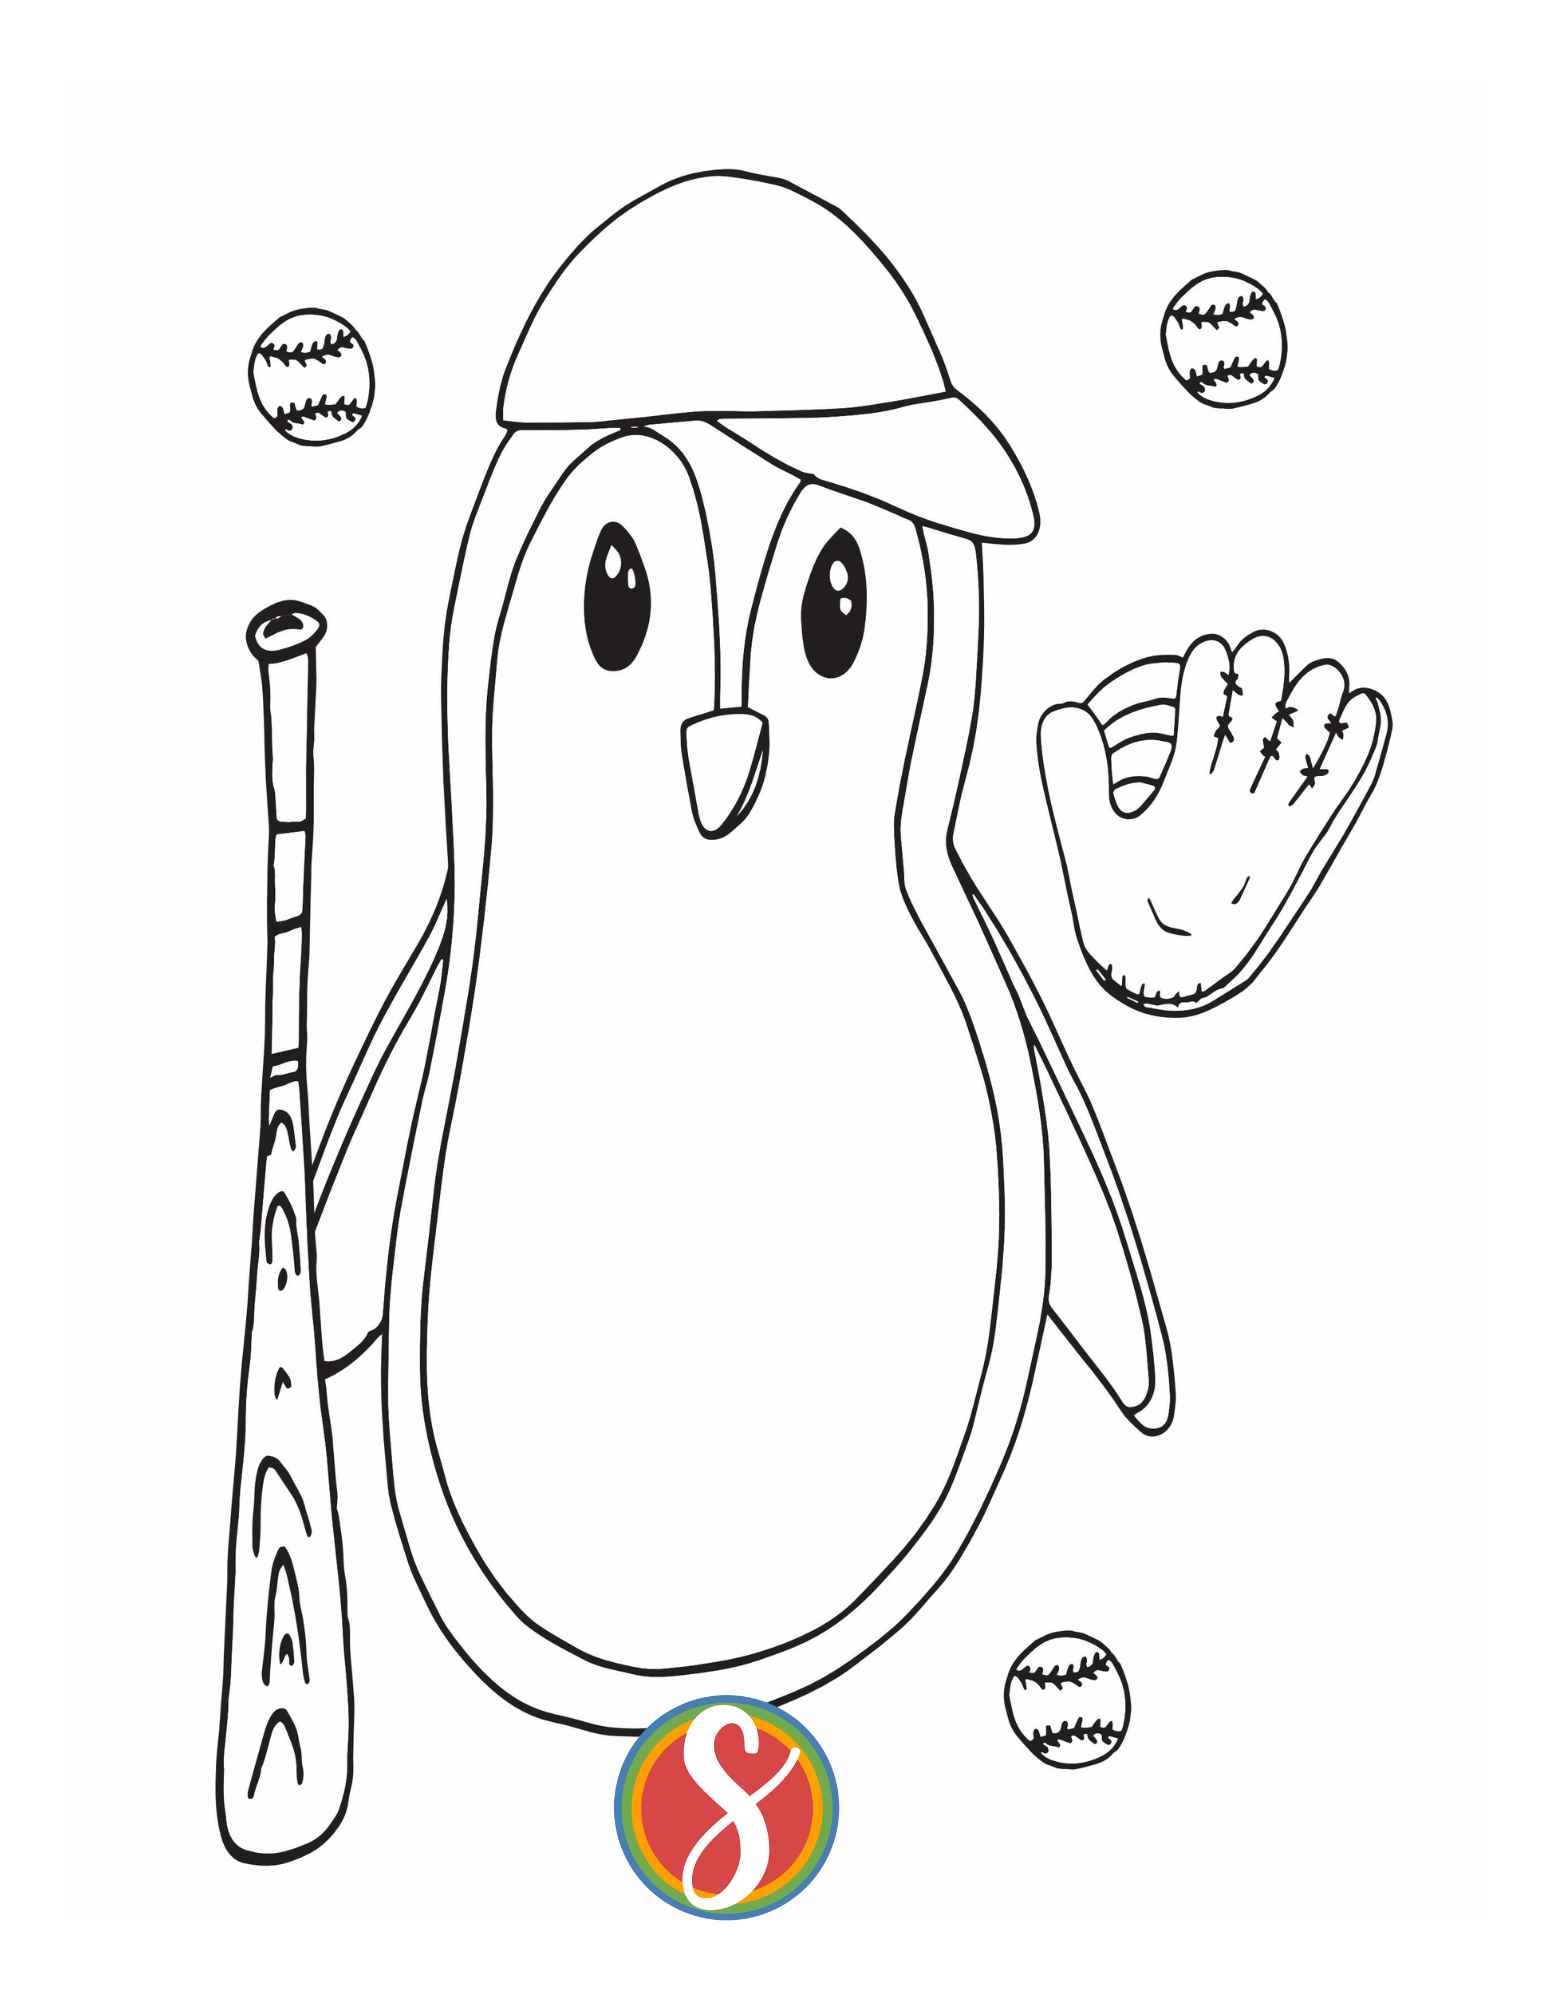 Simple colorable penguin with big eyes, wearing a plain baseball cap and holding a colorable baseball bat, around the penguin are colorable baseballs and a baseball mitt